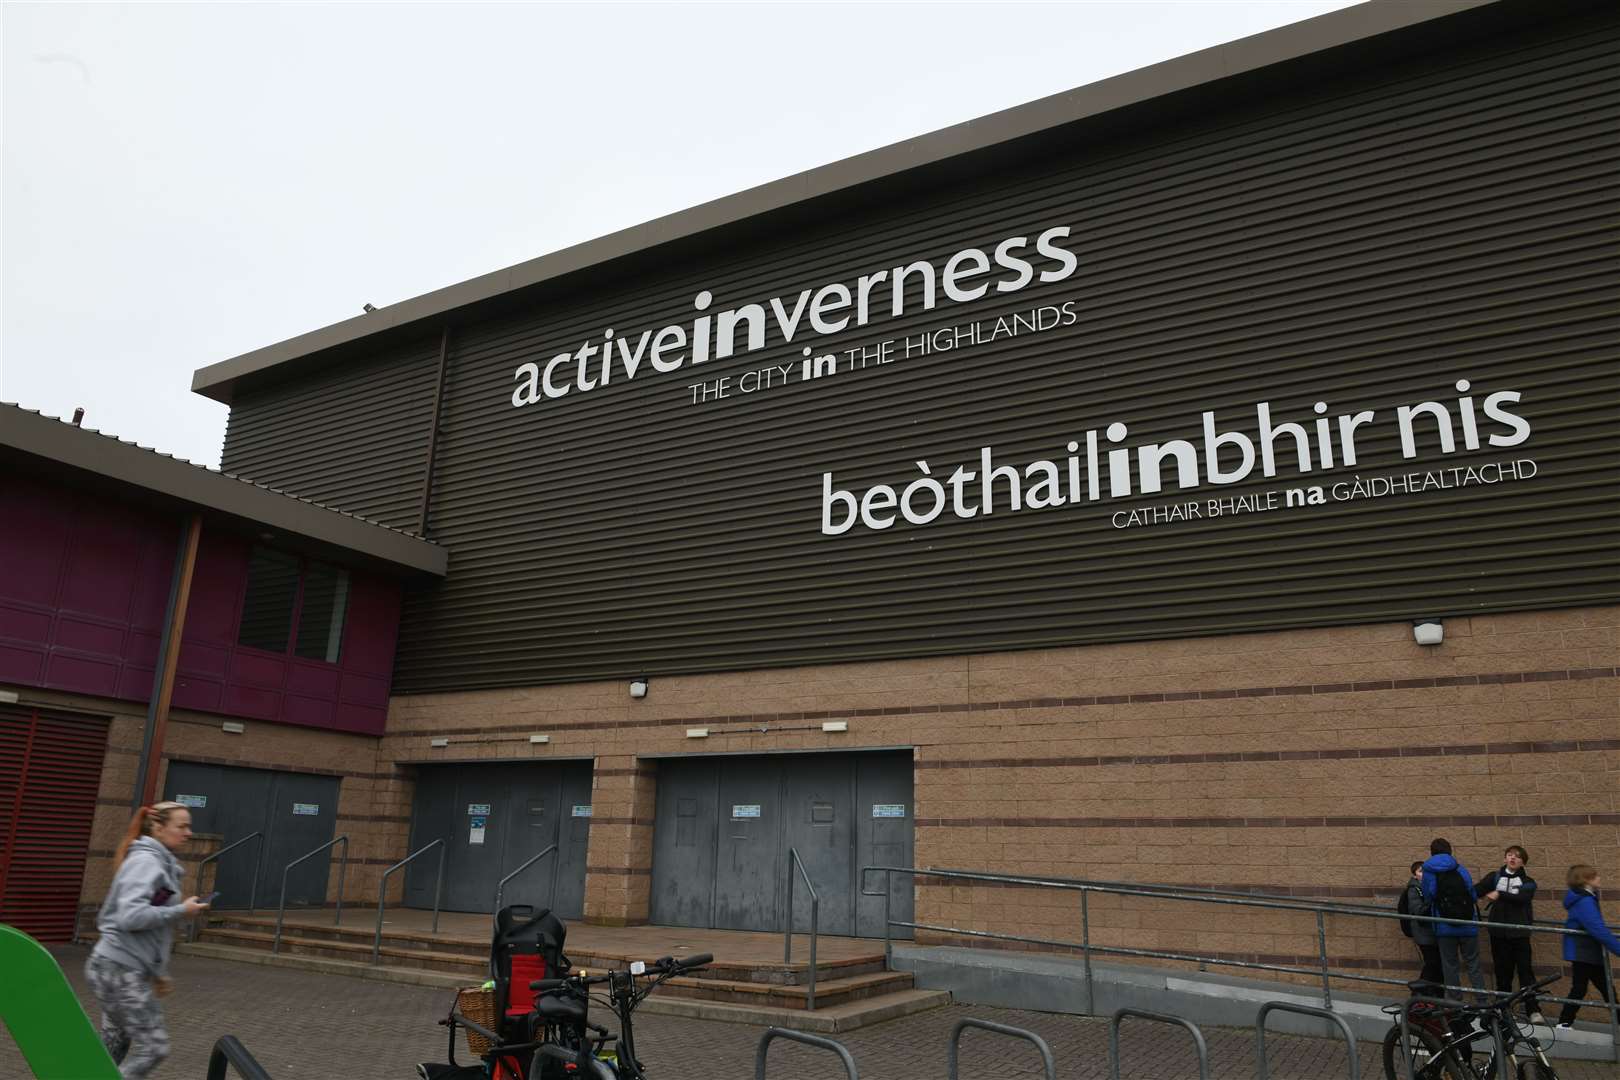 Get to know Inverness Leisure Centre at Open Day